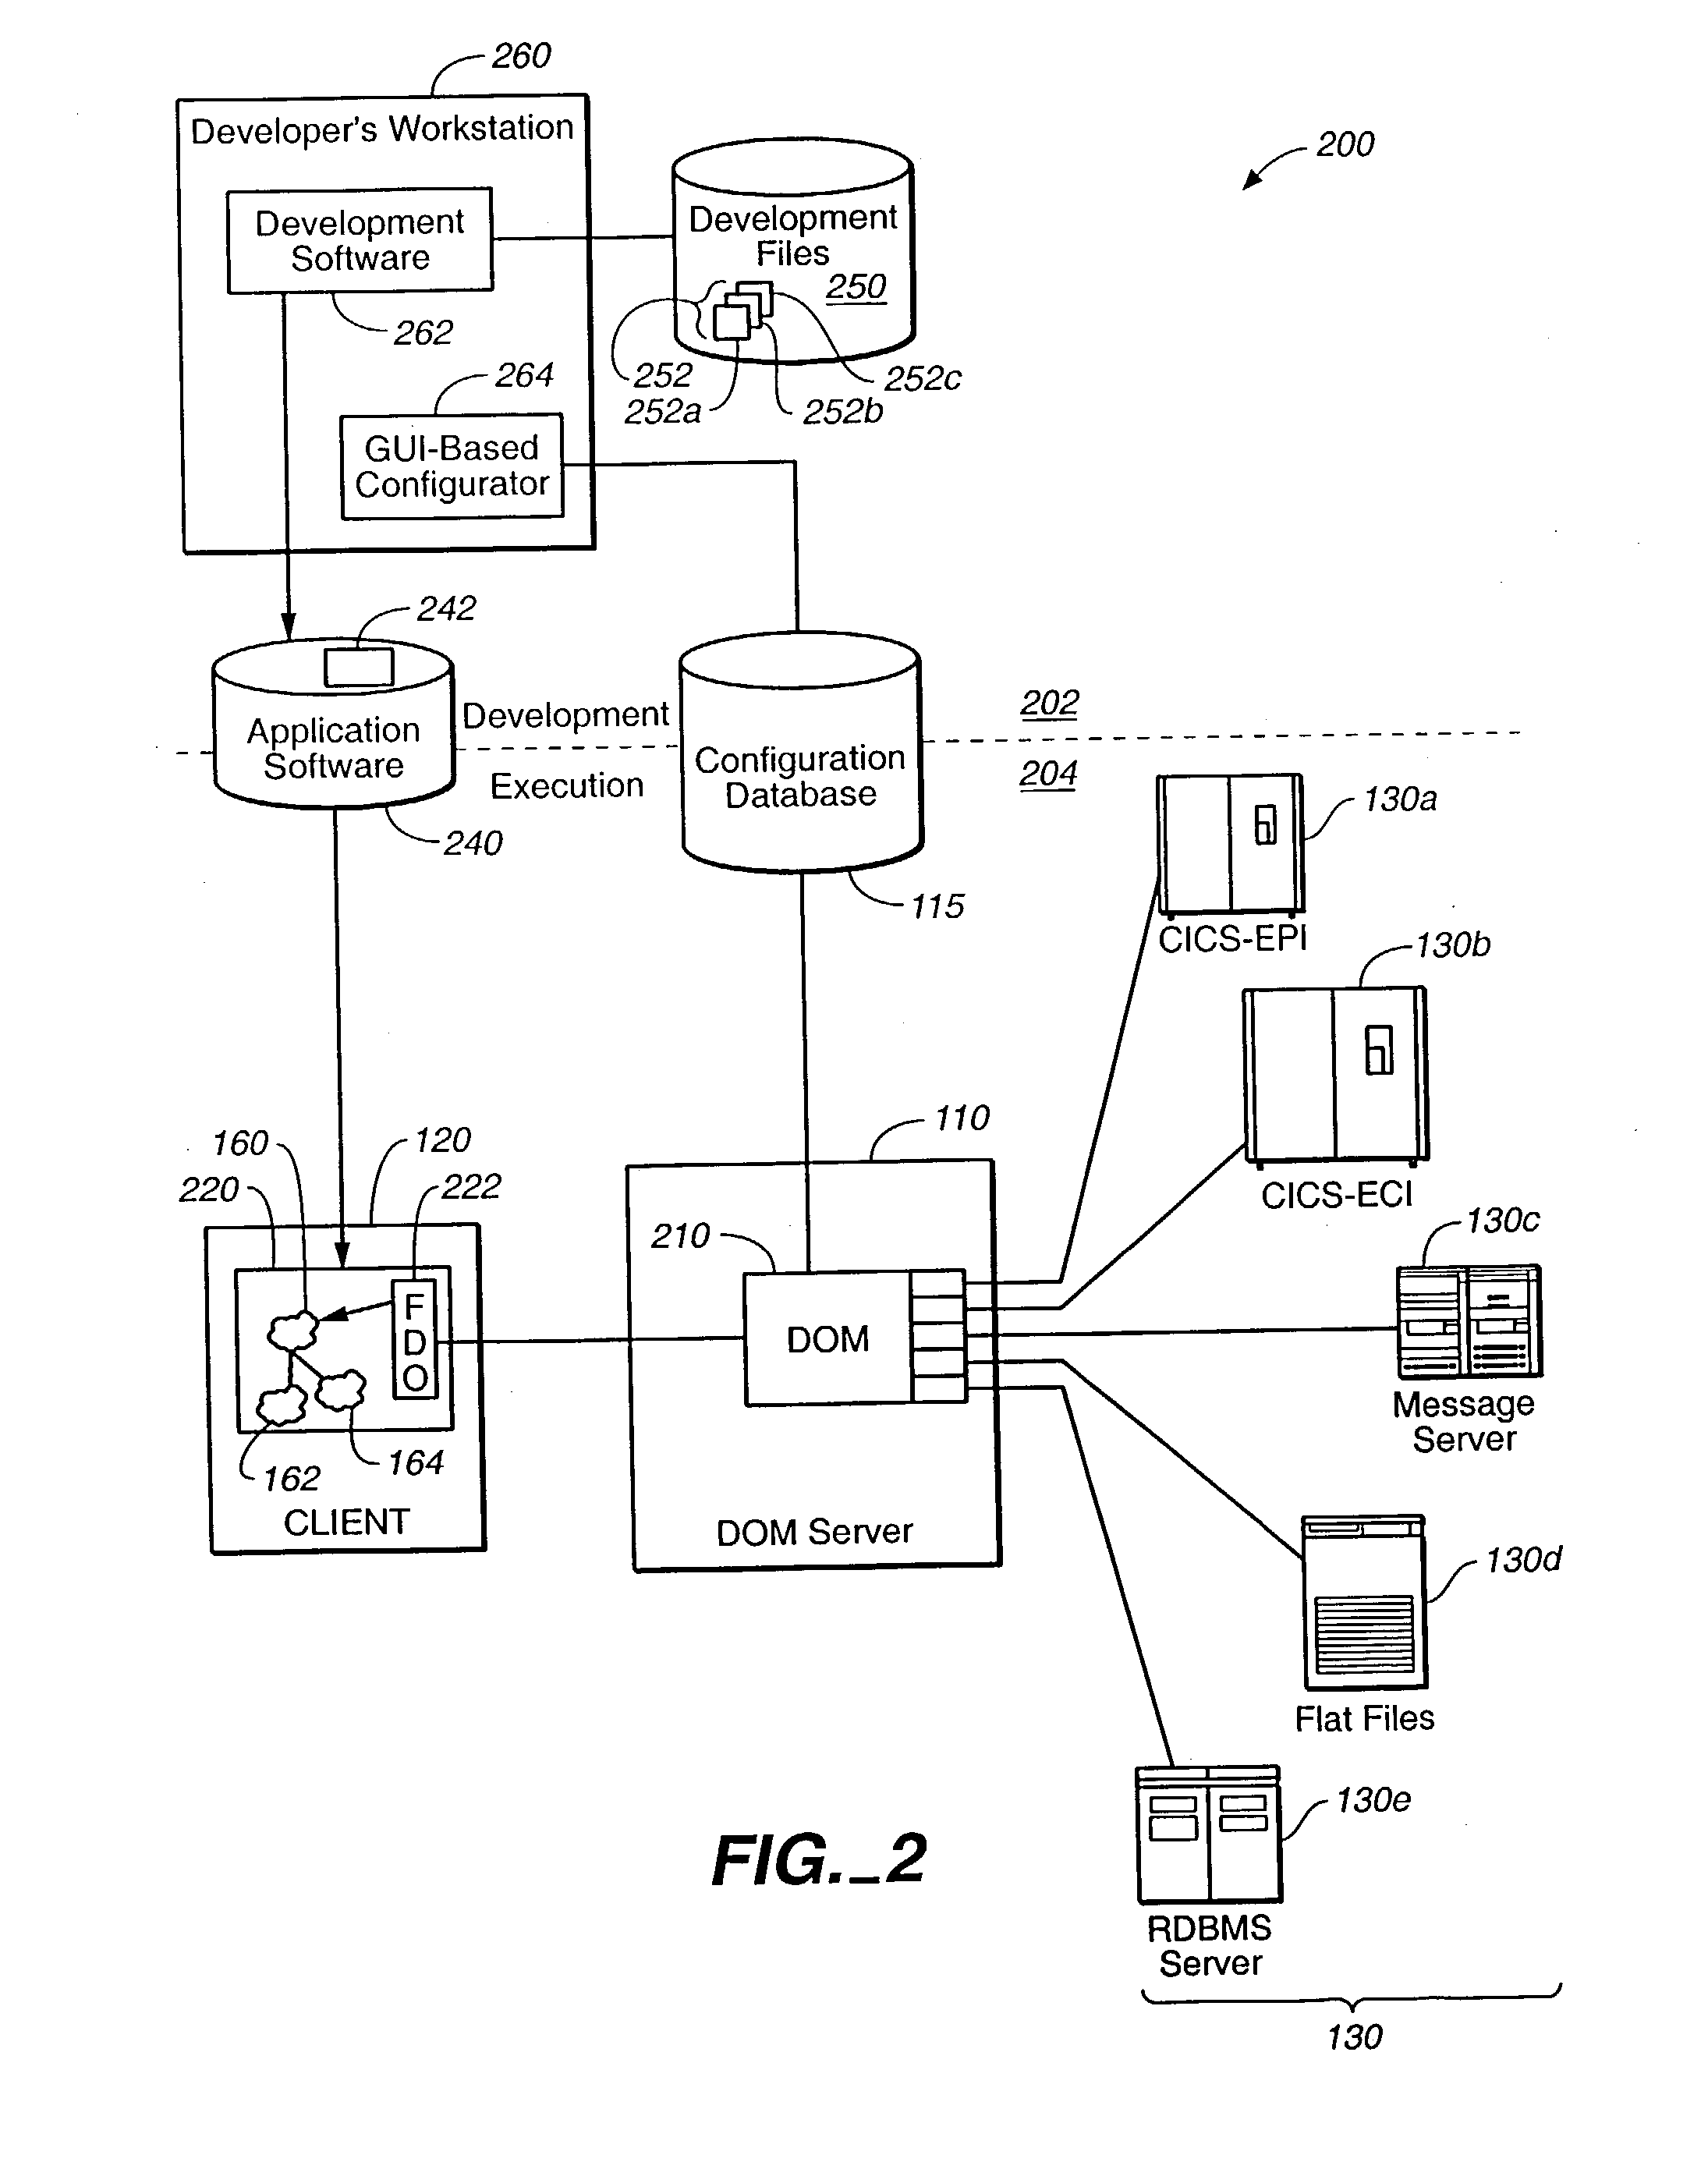 Method and apparatus for data item movement between disparate sources and hierarchical, object-oriented representation